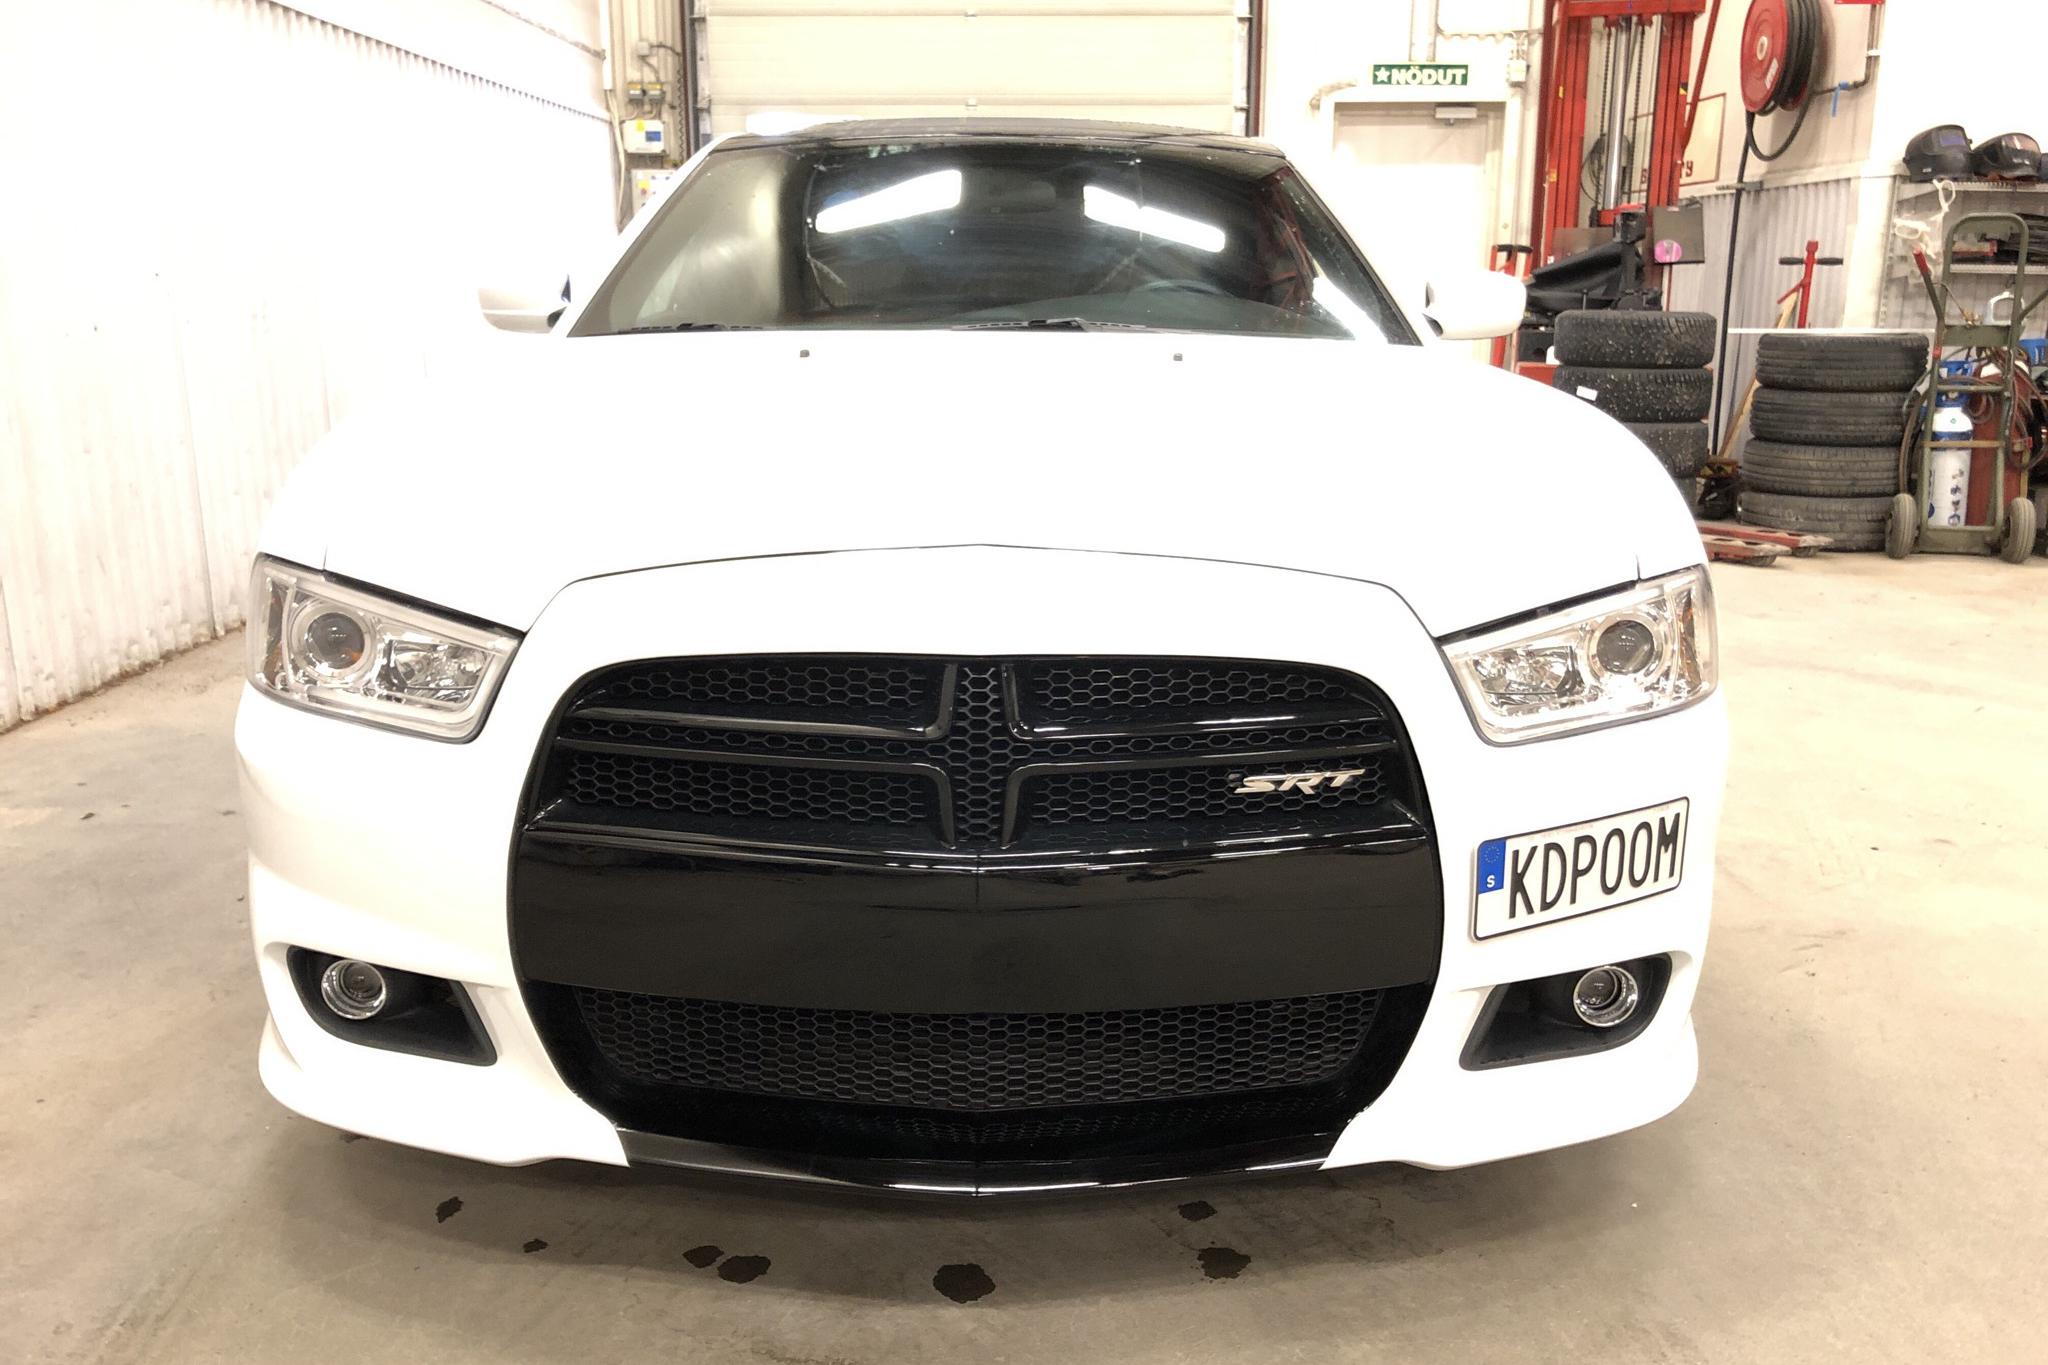 Dodge Charger 3.6 V6 (297hk) - 86 940 km - Automatic - white - 2011